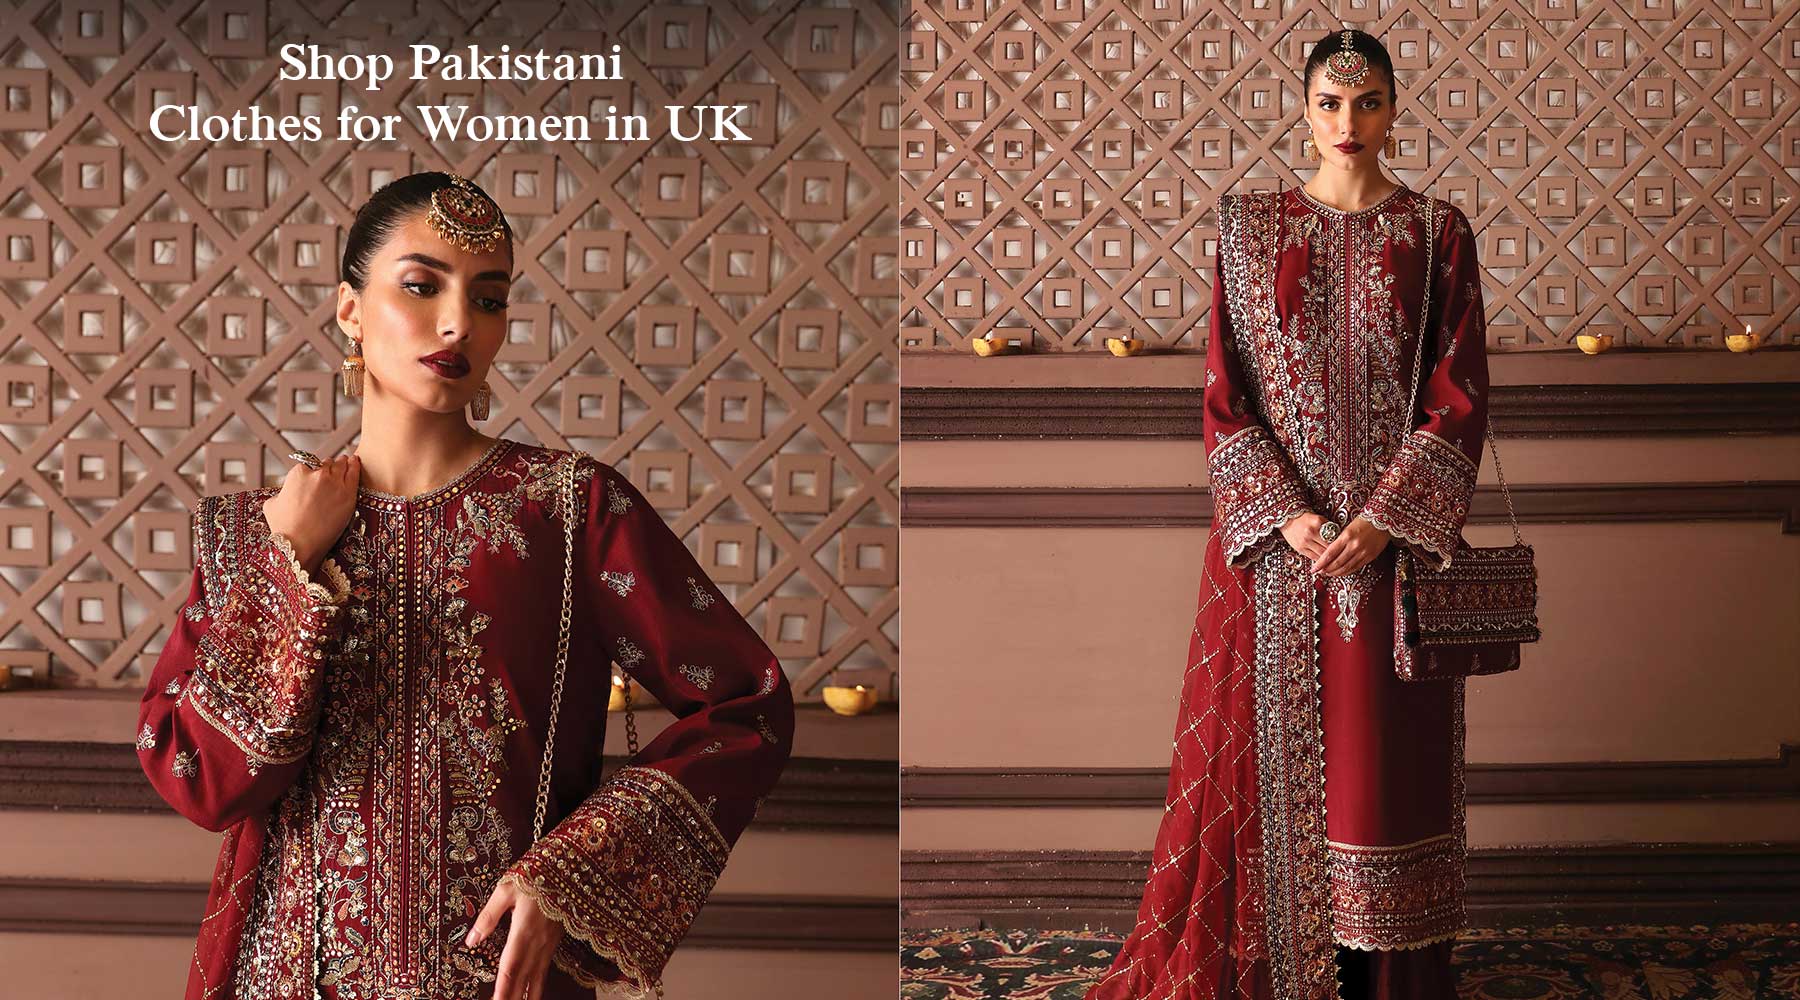 Discover Exquisite Pakistani Fashion in the UK with Amayrah Fashion